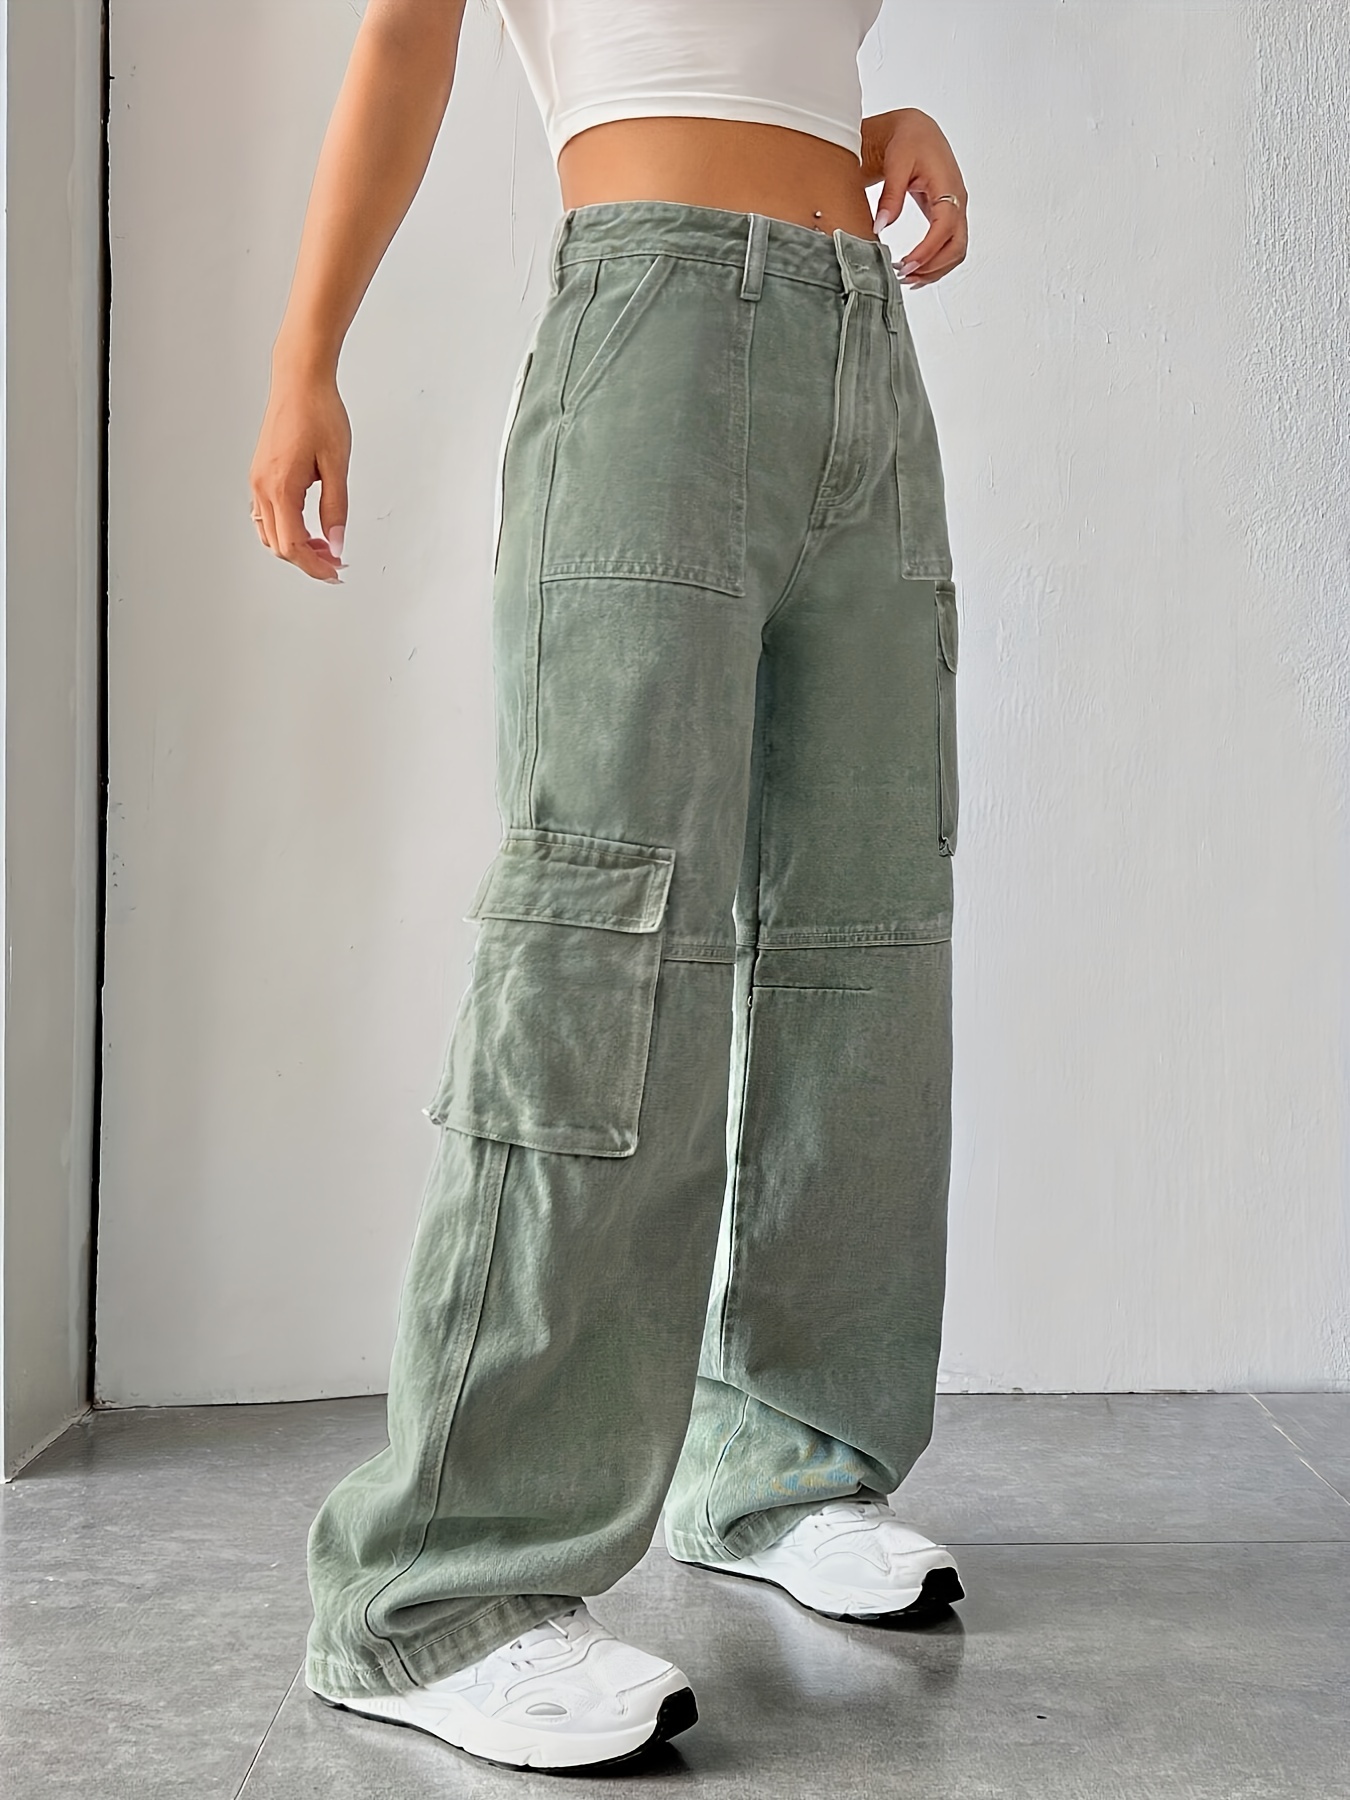 BDG Urban Outfitters Jeans & Denim for Young Adult Women